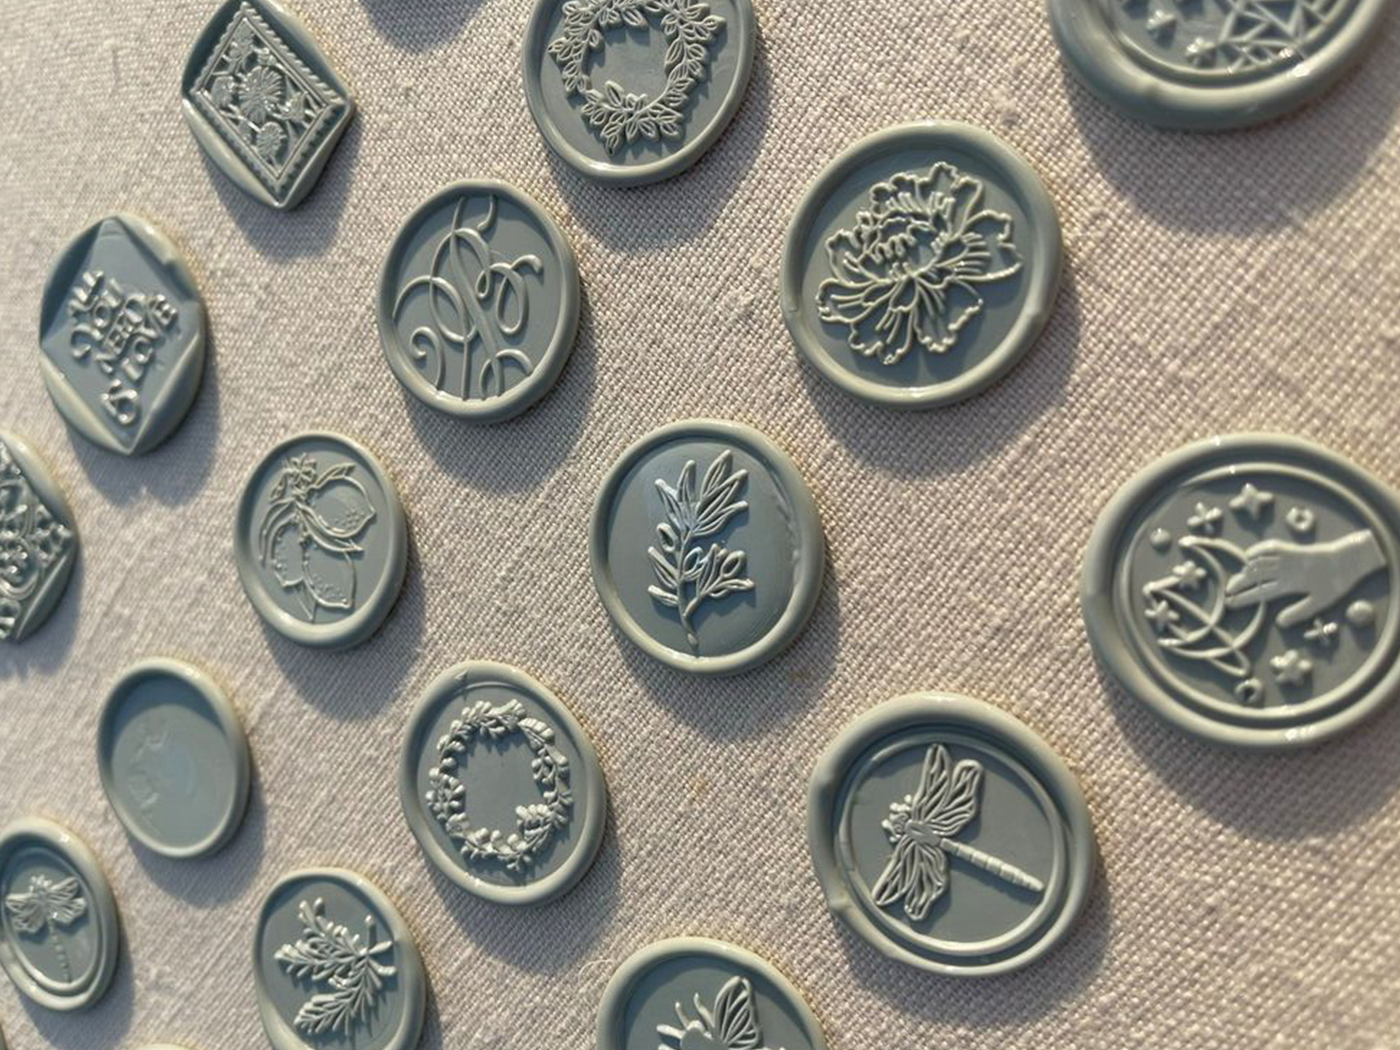 The Wonder of Wax Seal Stickers: A Guide to Materials, Crafting and Use